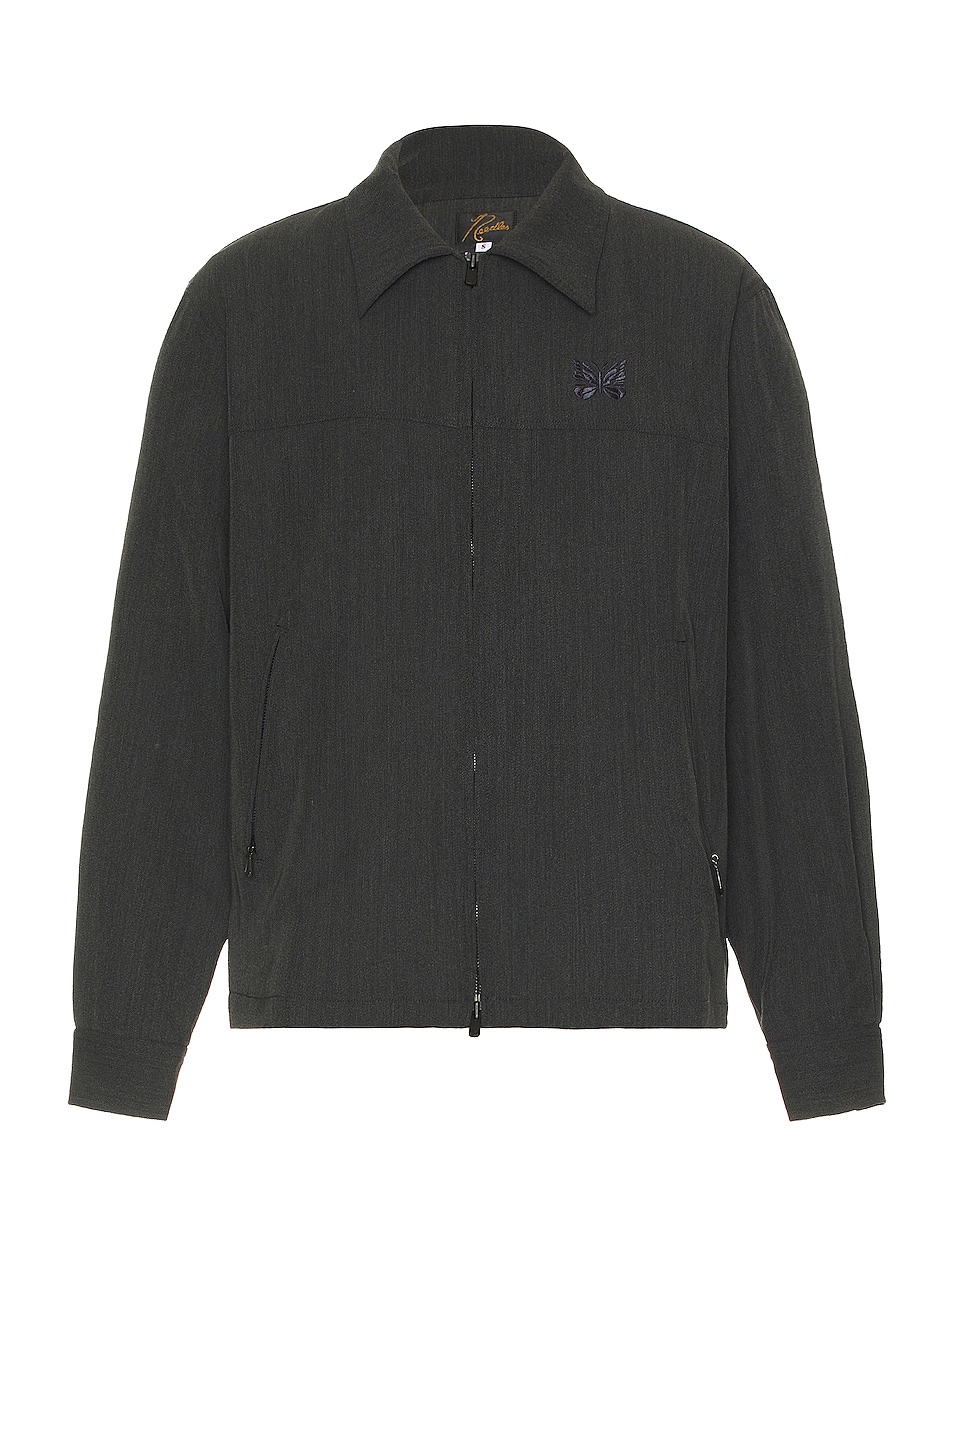 Image 1 of Needles Sport Jacket in Charcoal